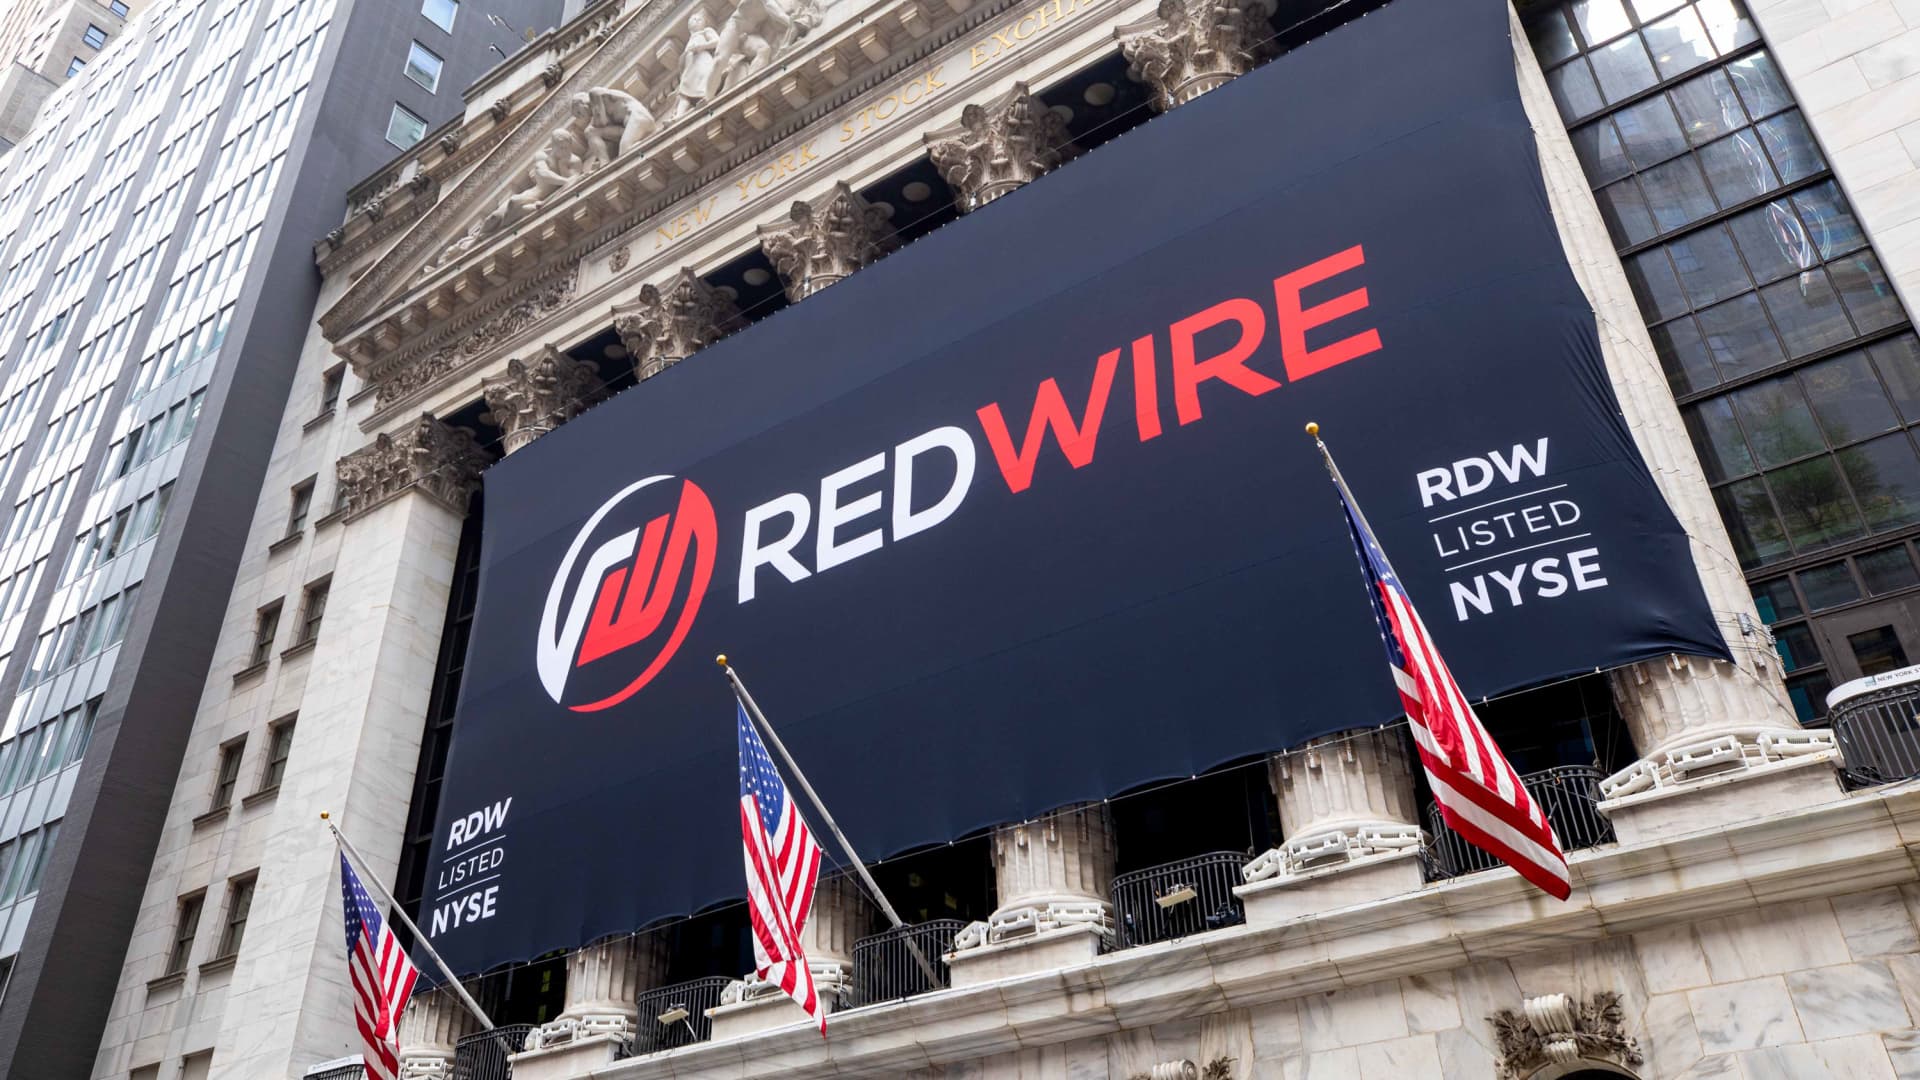 Redwire (RDW) space company Q2 earnings